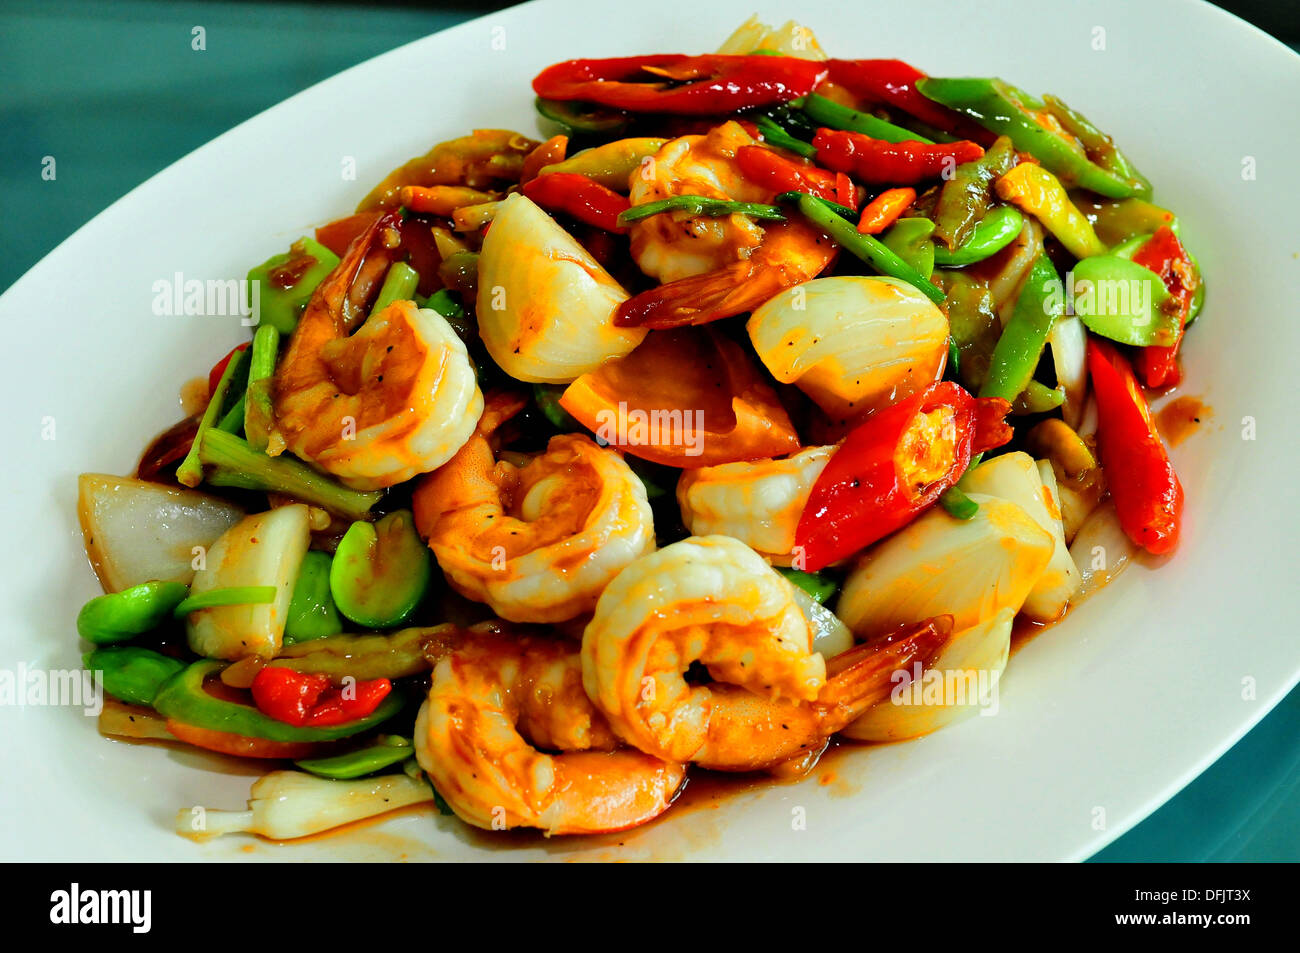 Taste of Thailand - Stinky beans stir fried in red curry paste with shrimp Stock Photo